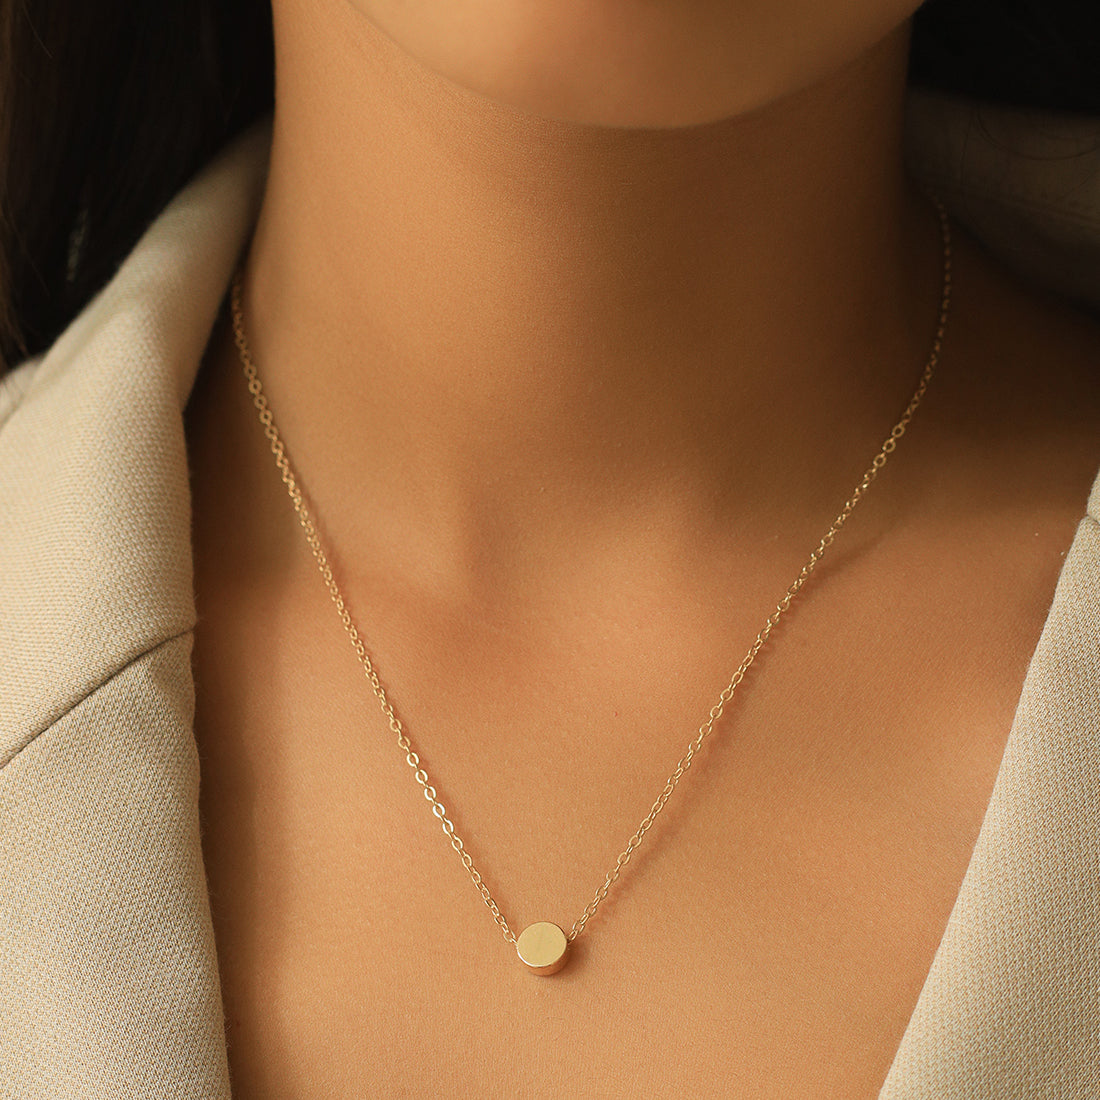 Gold-Toned Chain With Minimalist Circular Pendant